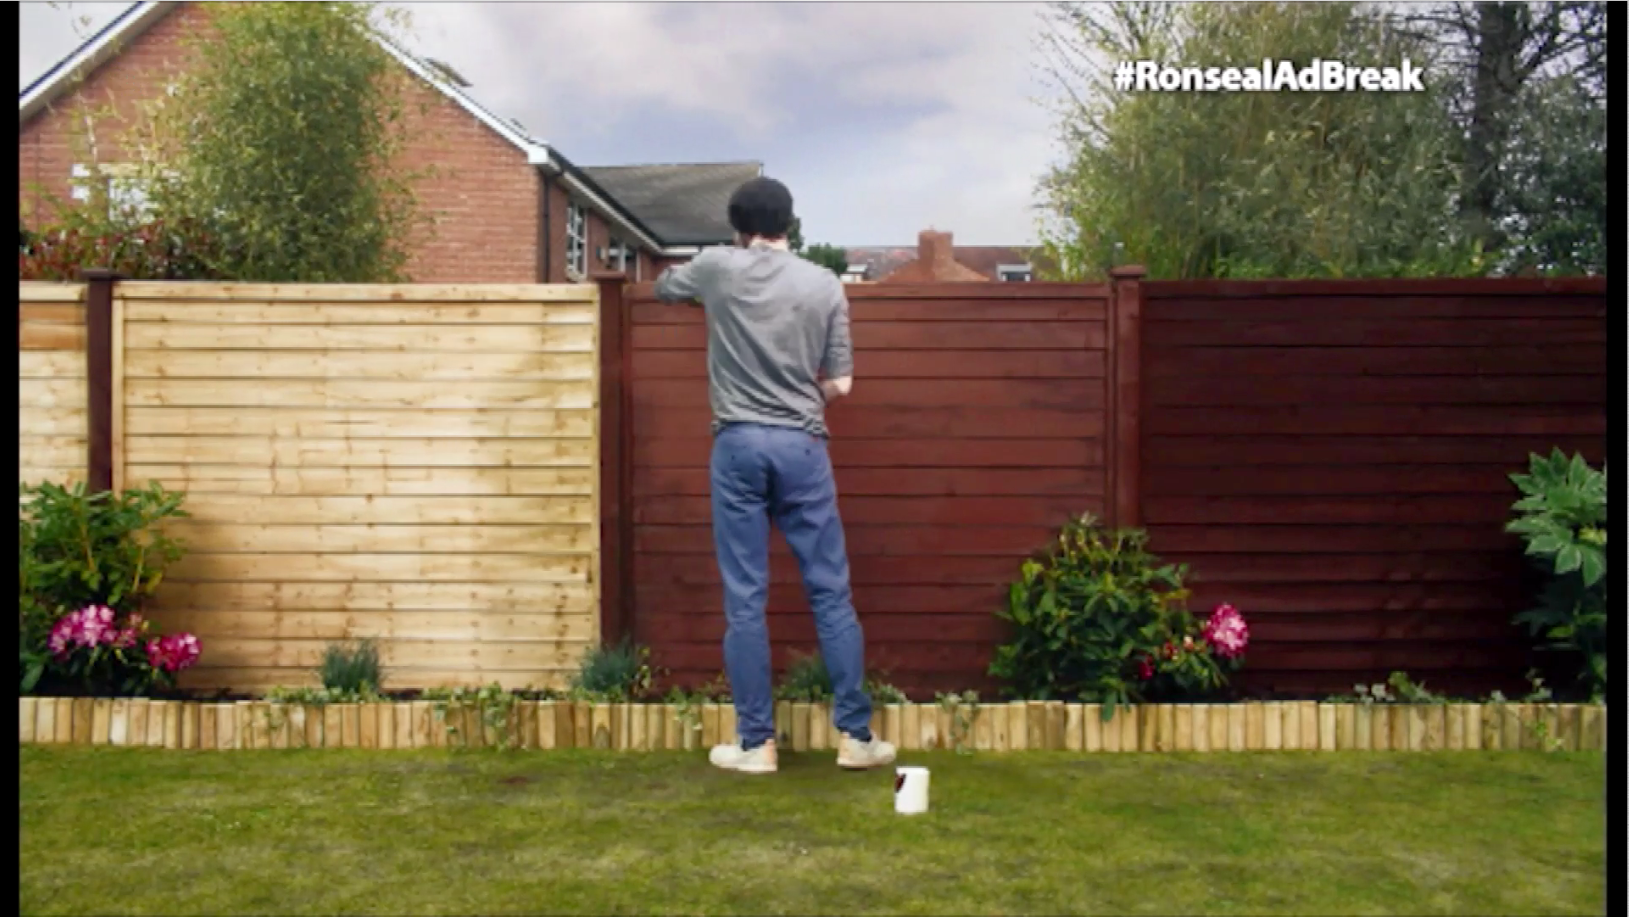 The man featured in the humorous advert pictured painting his fence